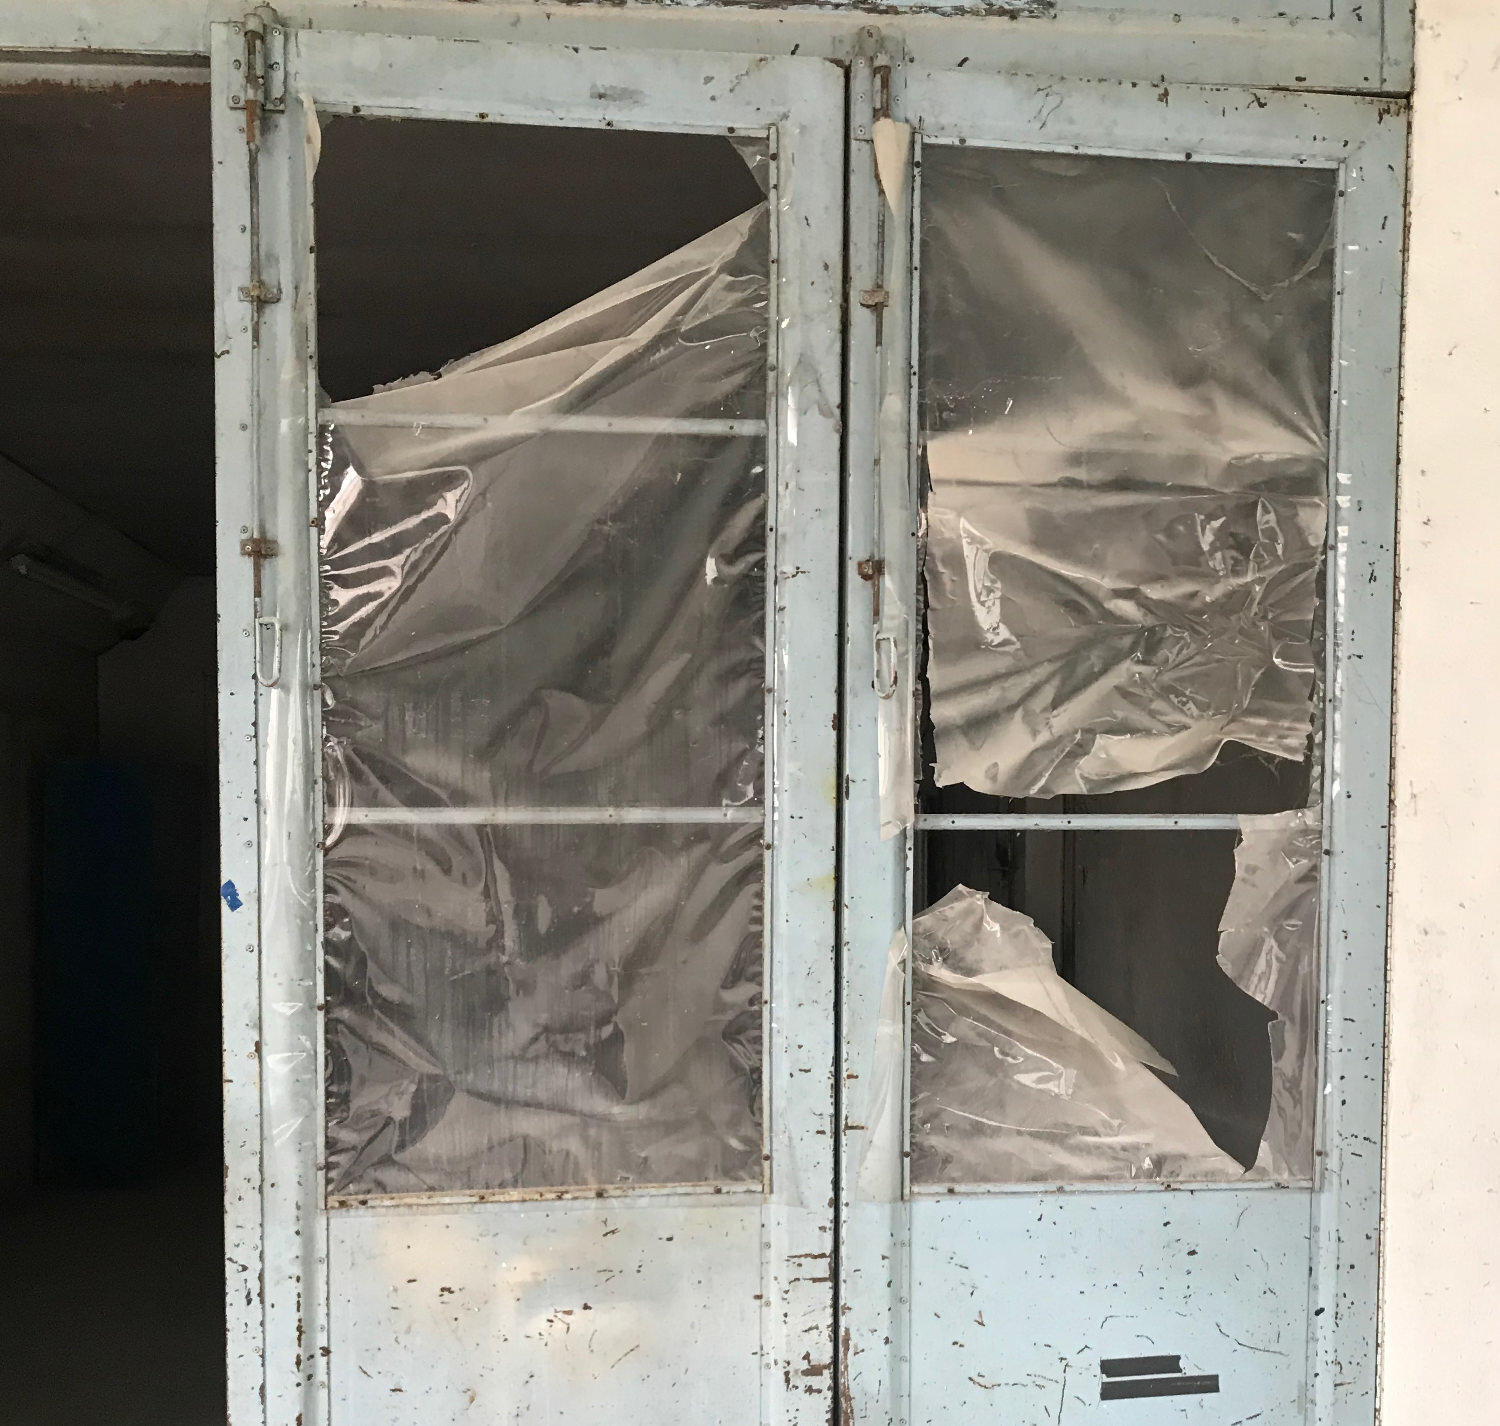 July 2 doors to spray booth